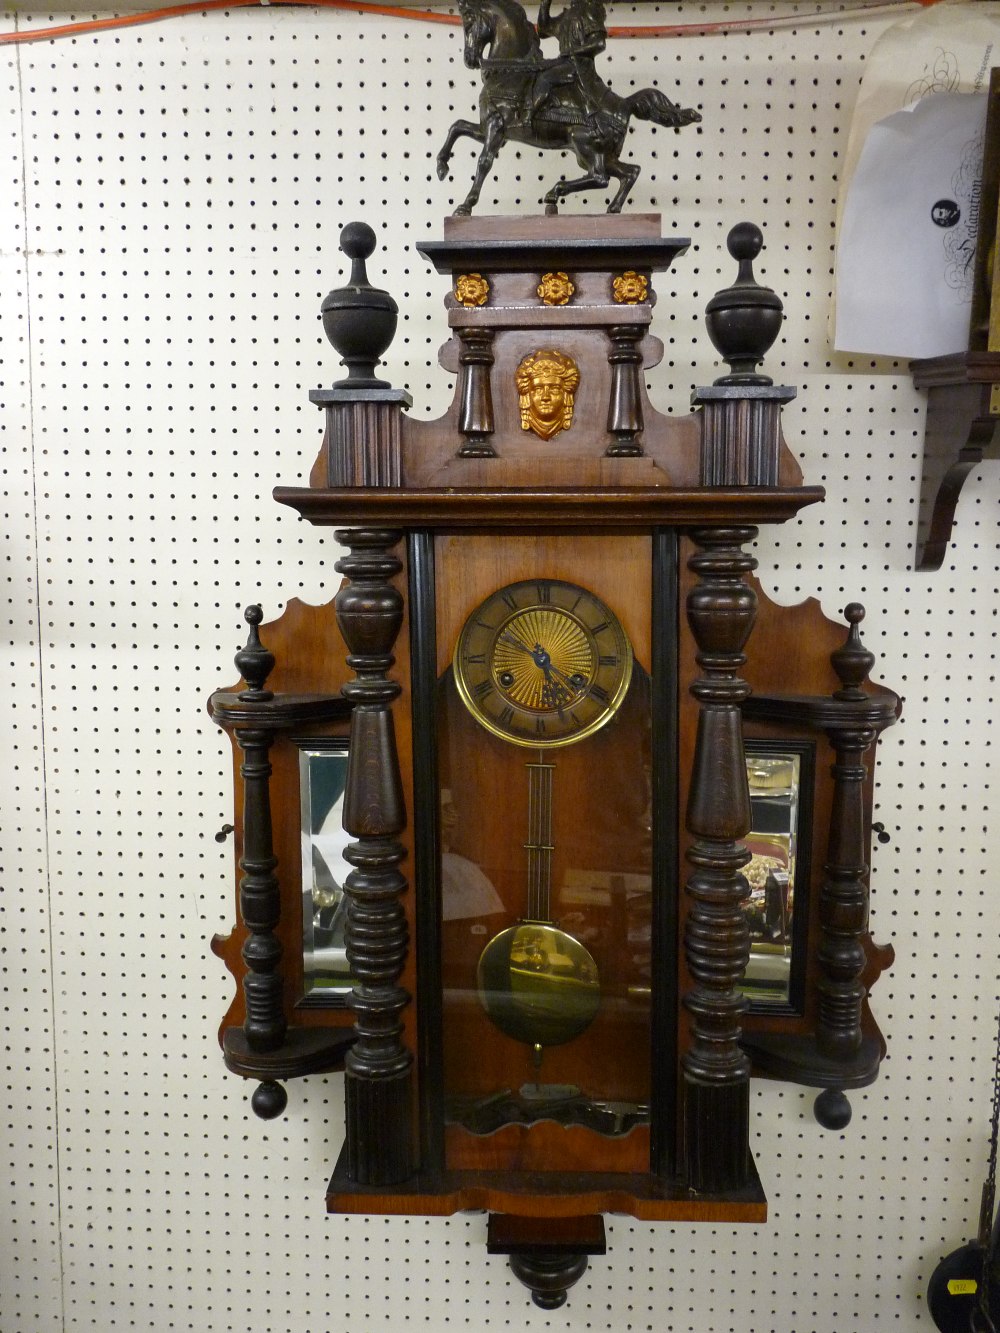 AN UNUSUAL VIENNA TYPE WALL CLOCK, pendulum driven brass faced movement in a walnut and mixed wood